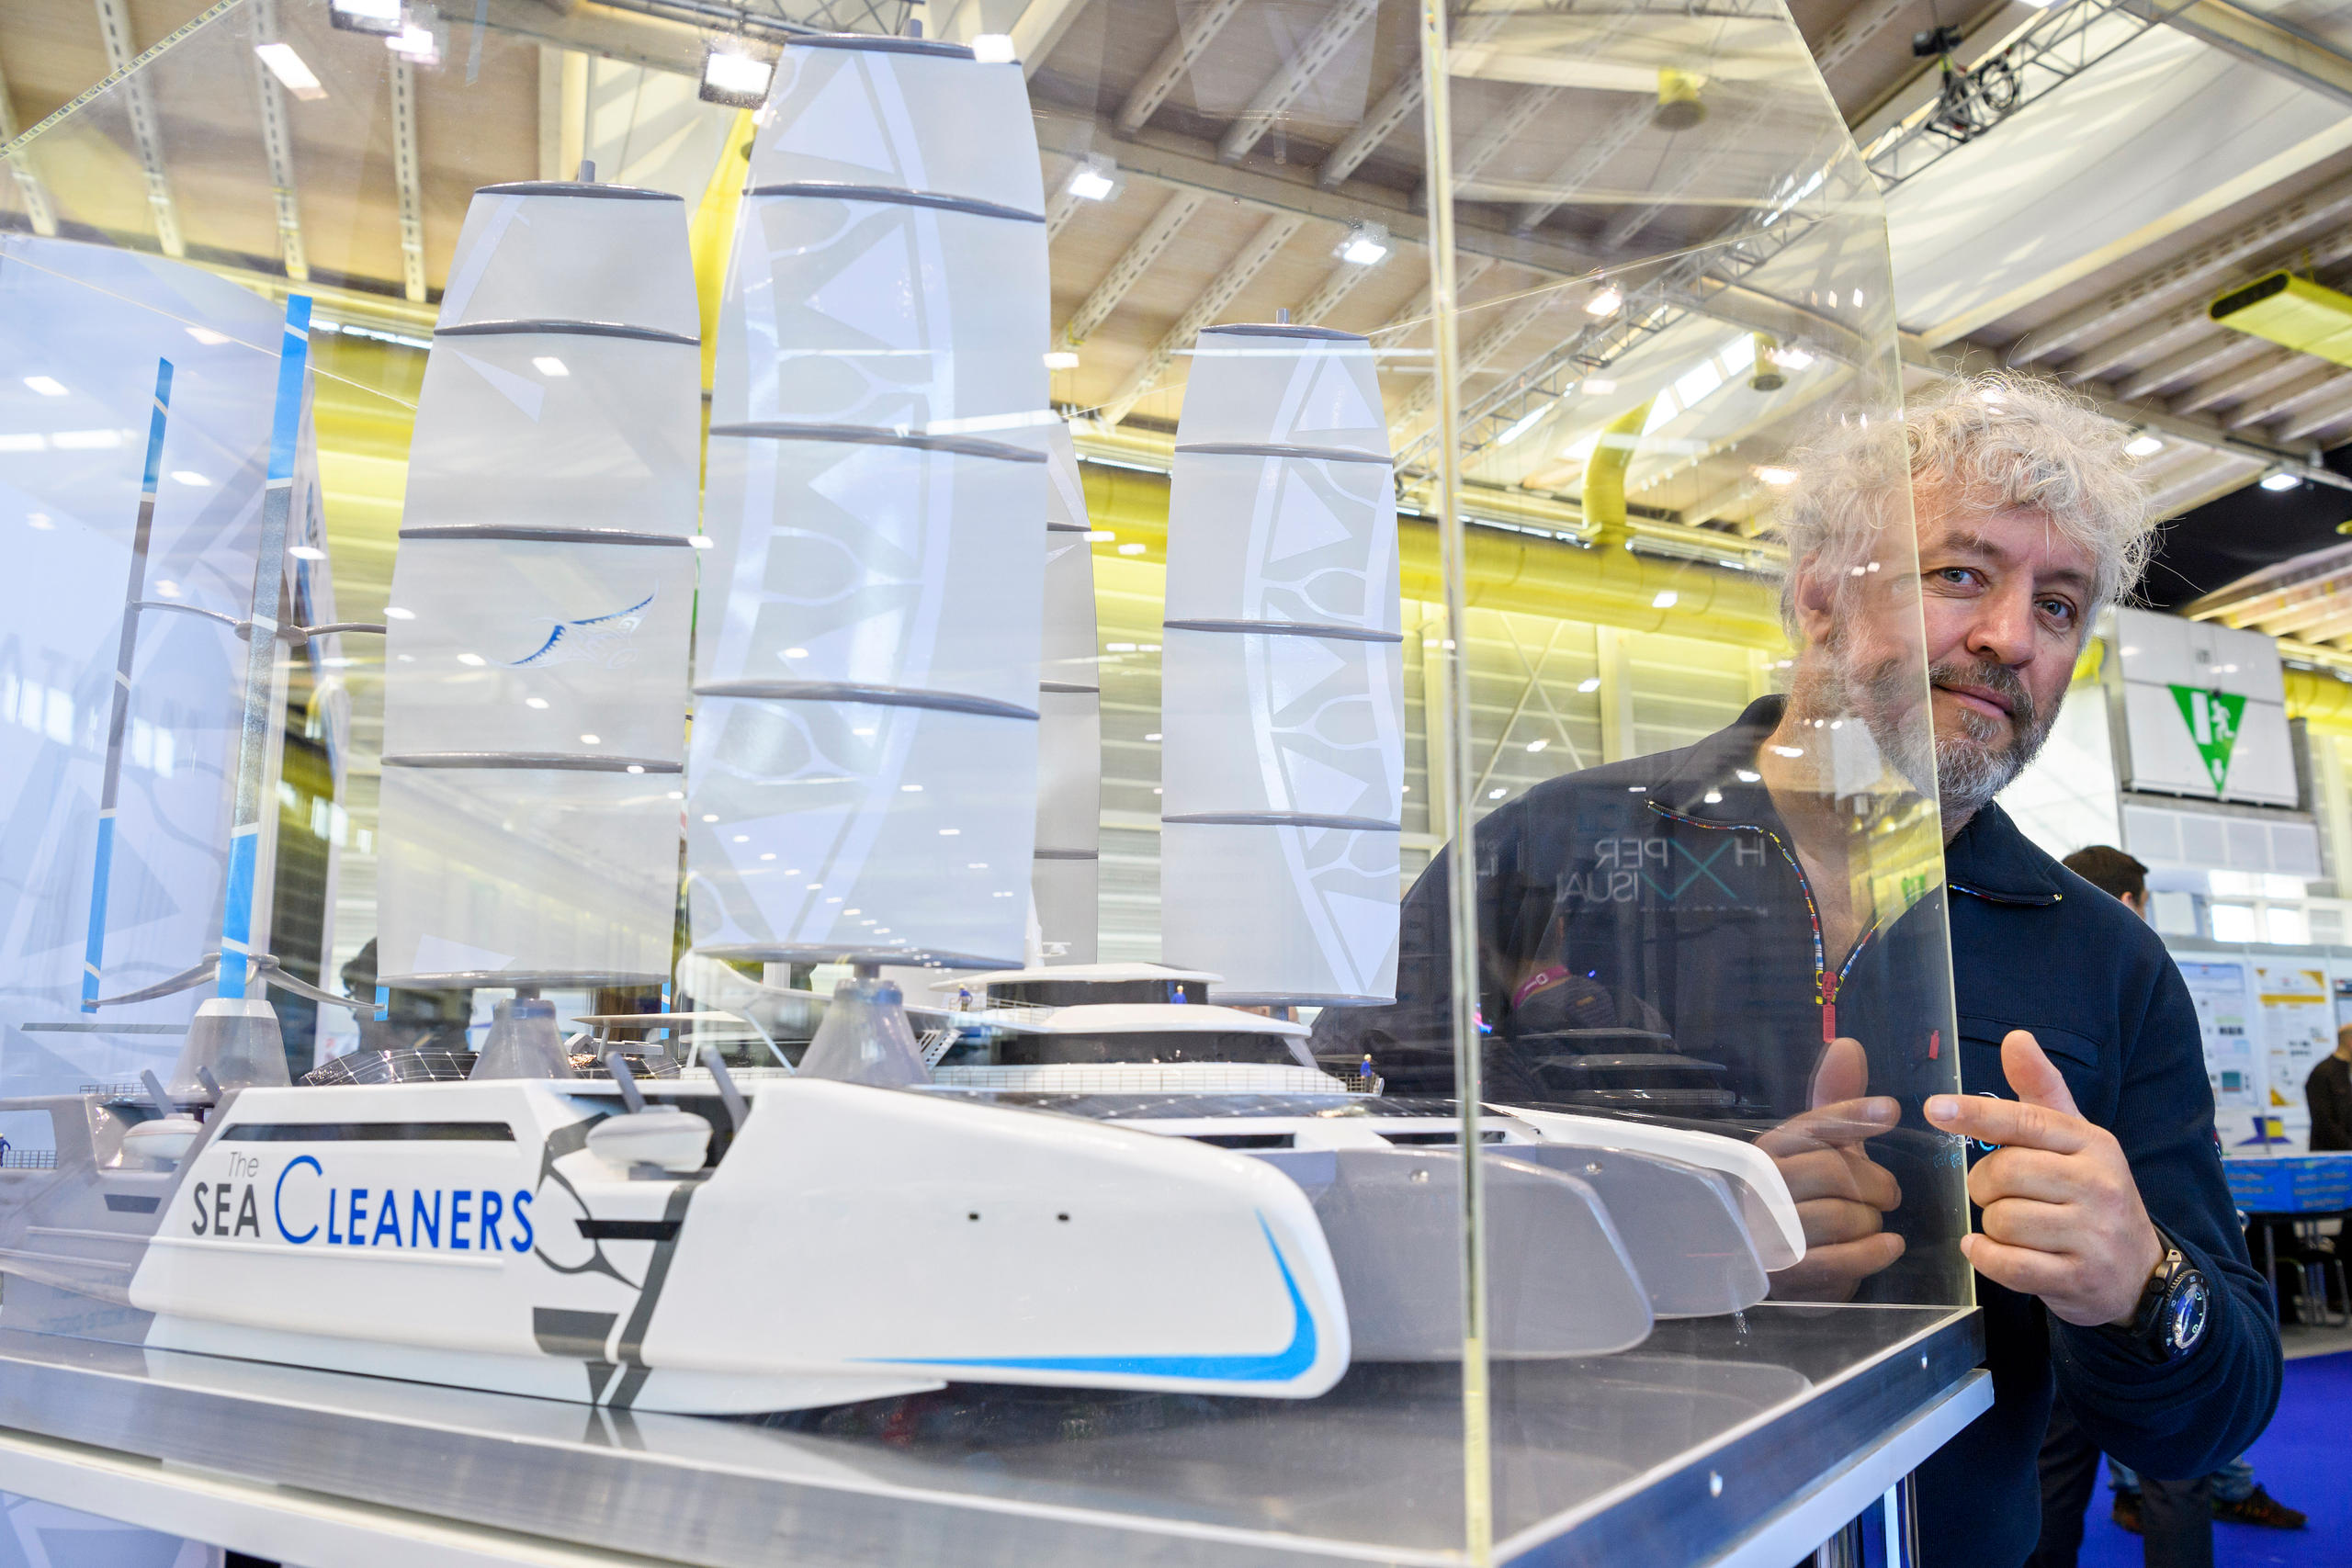 Yvan Bourgnon and a small scale model of a catamaran